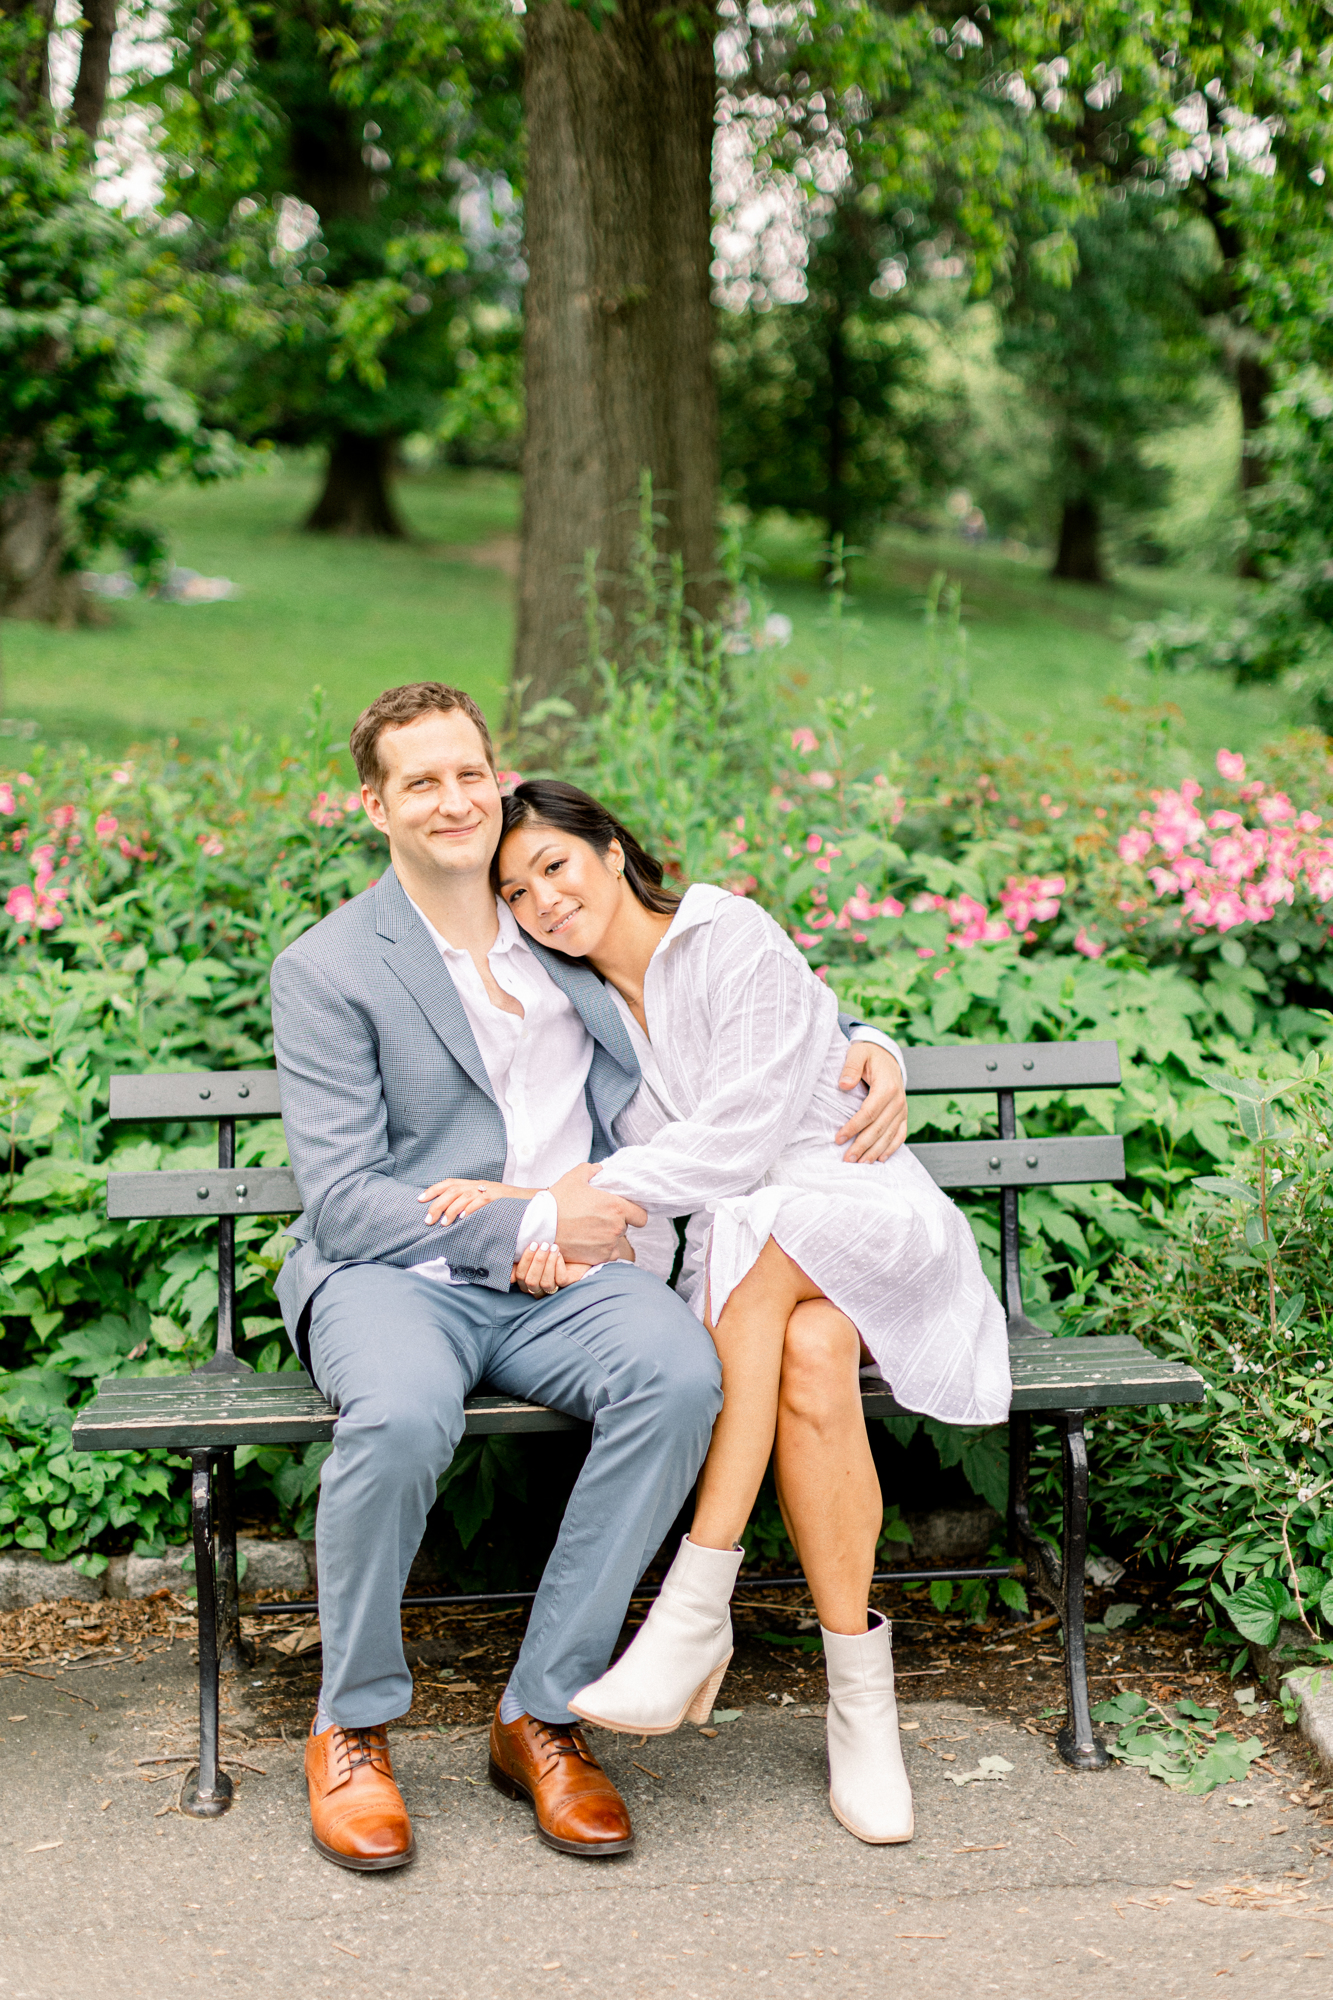 Lovely Engagement Photos with a Professional Engagement Photographer